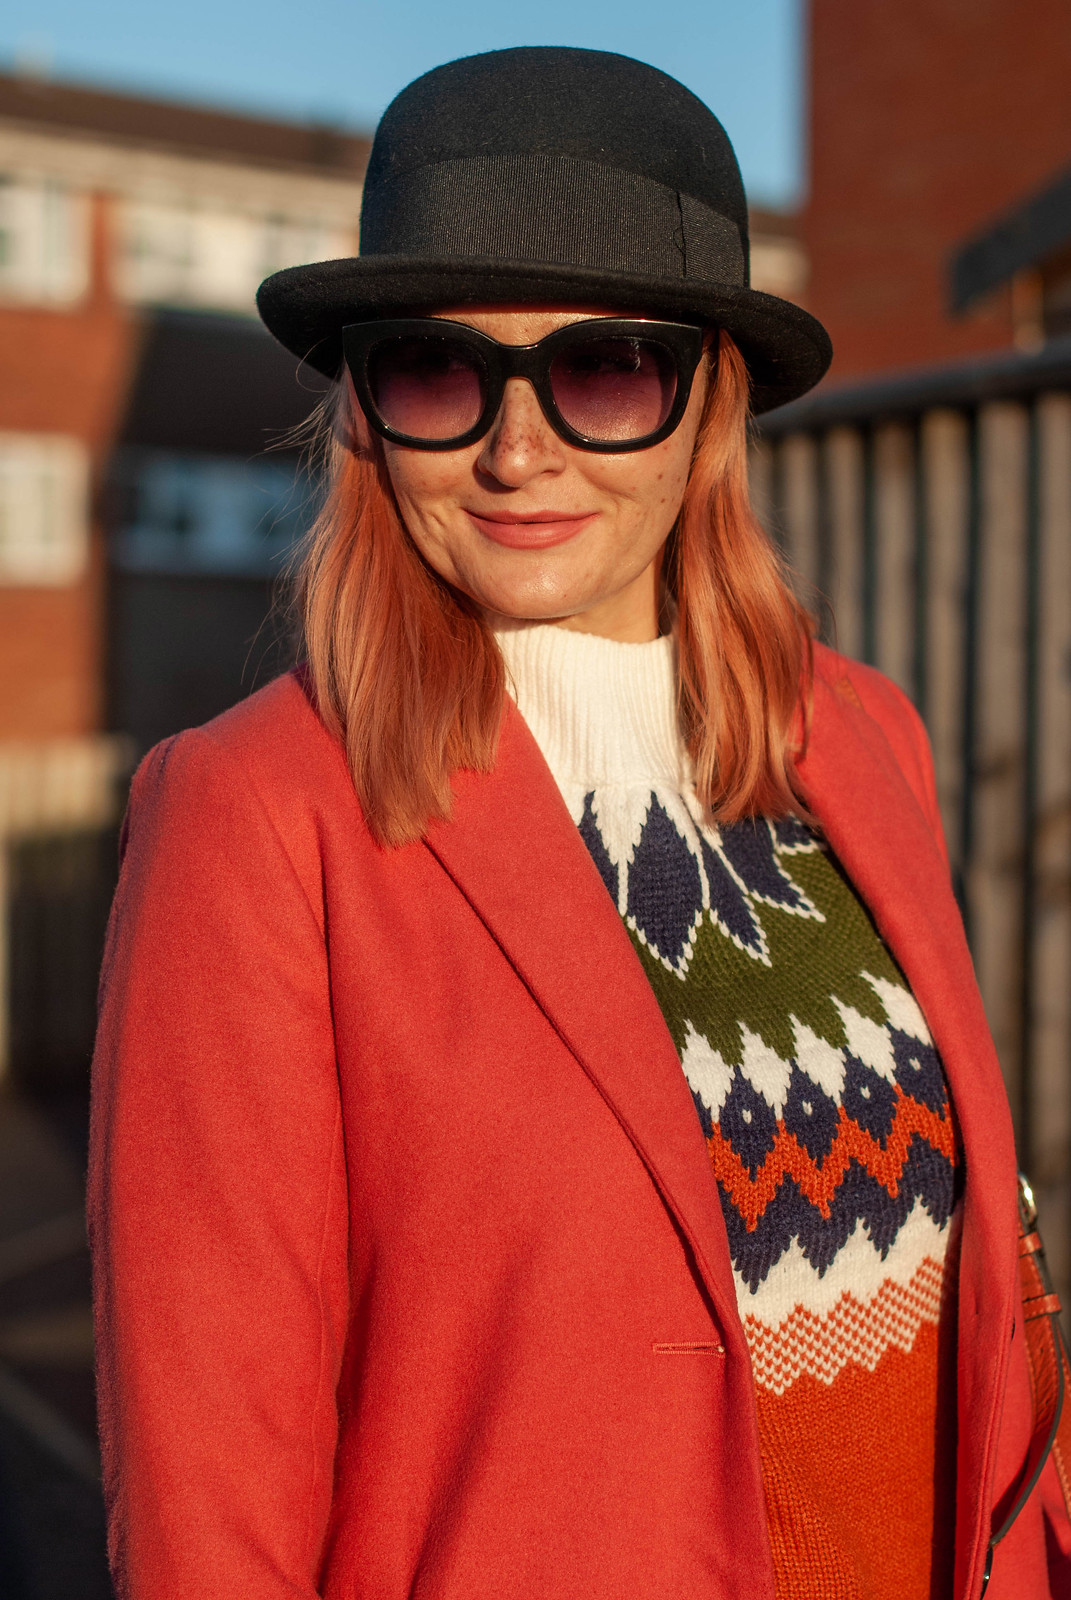 Bringing Back the Bowler Hat and a Modern Nordic Sweater | Not Dressed As Lamb, Style for Over 40 Women